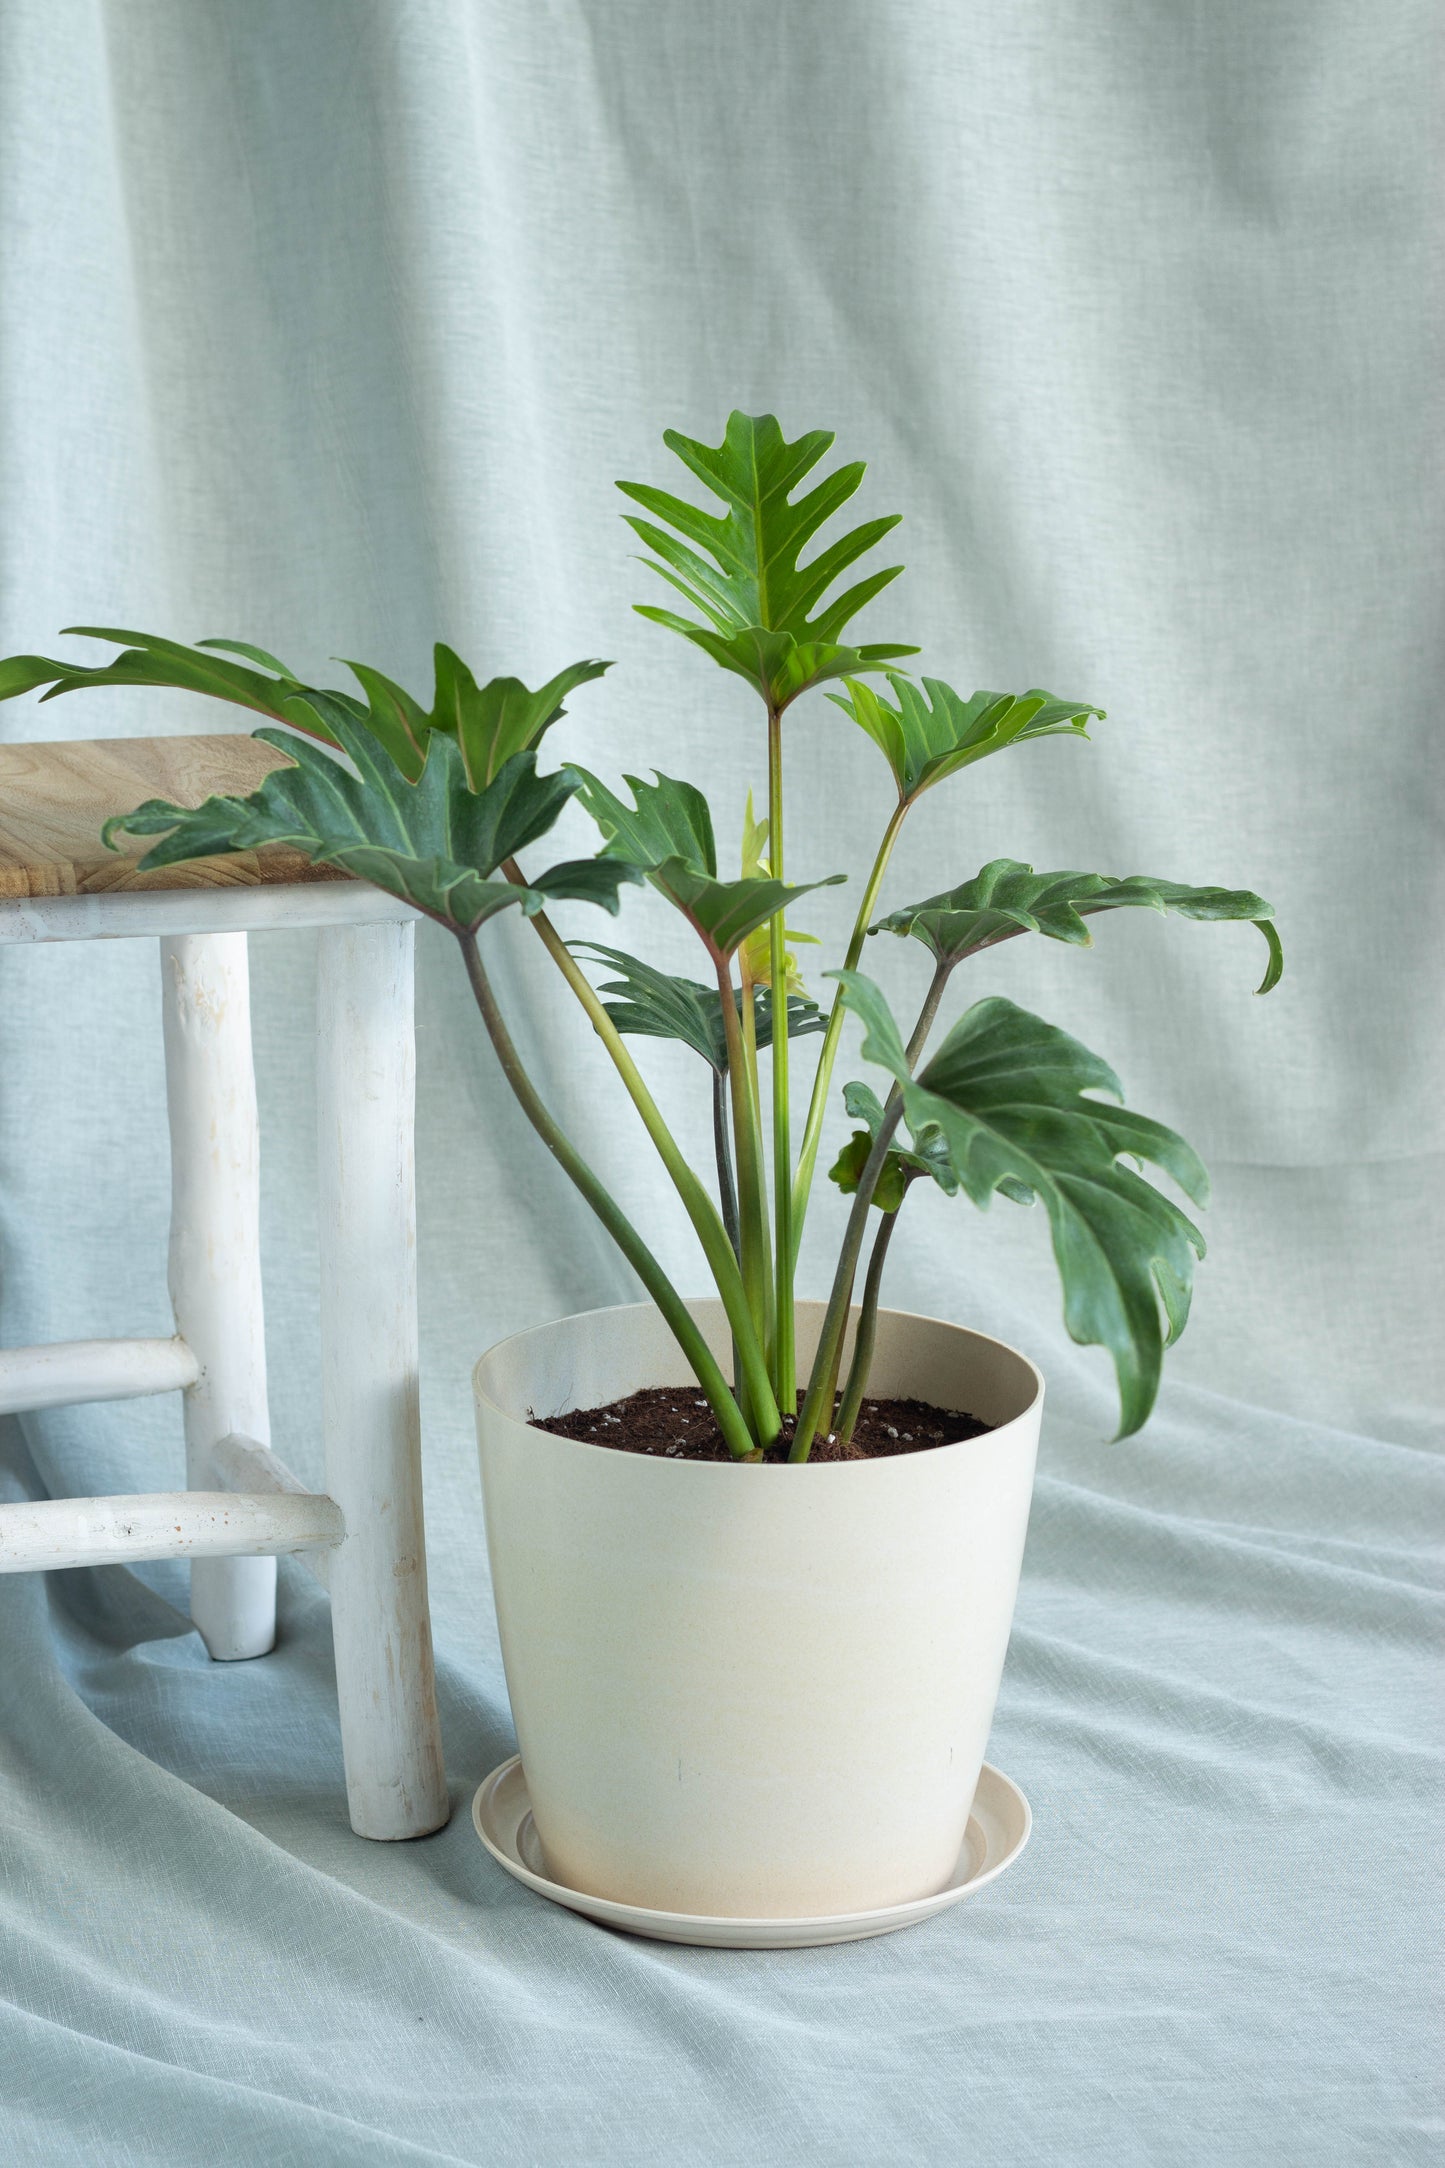 Philodendron Lacerum